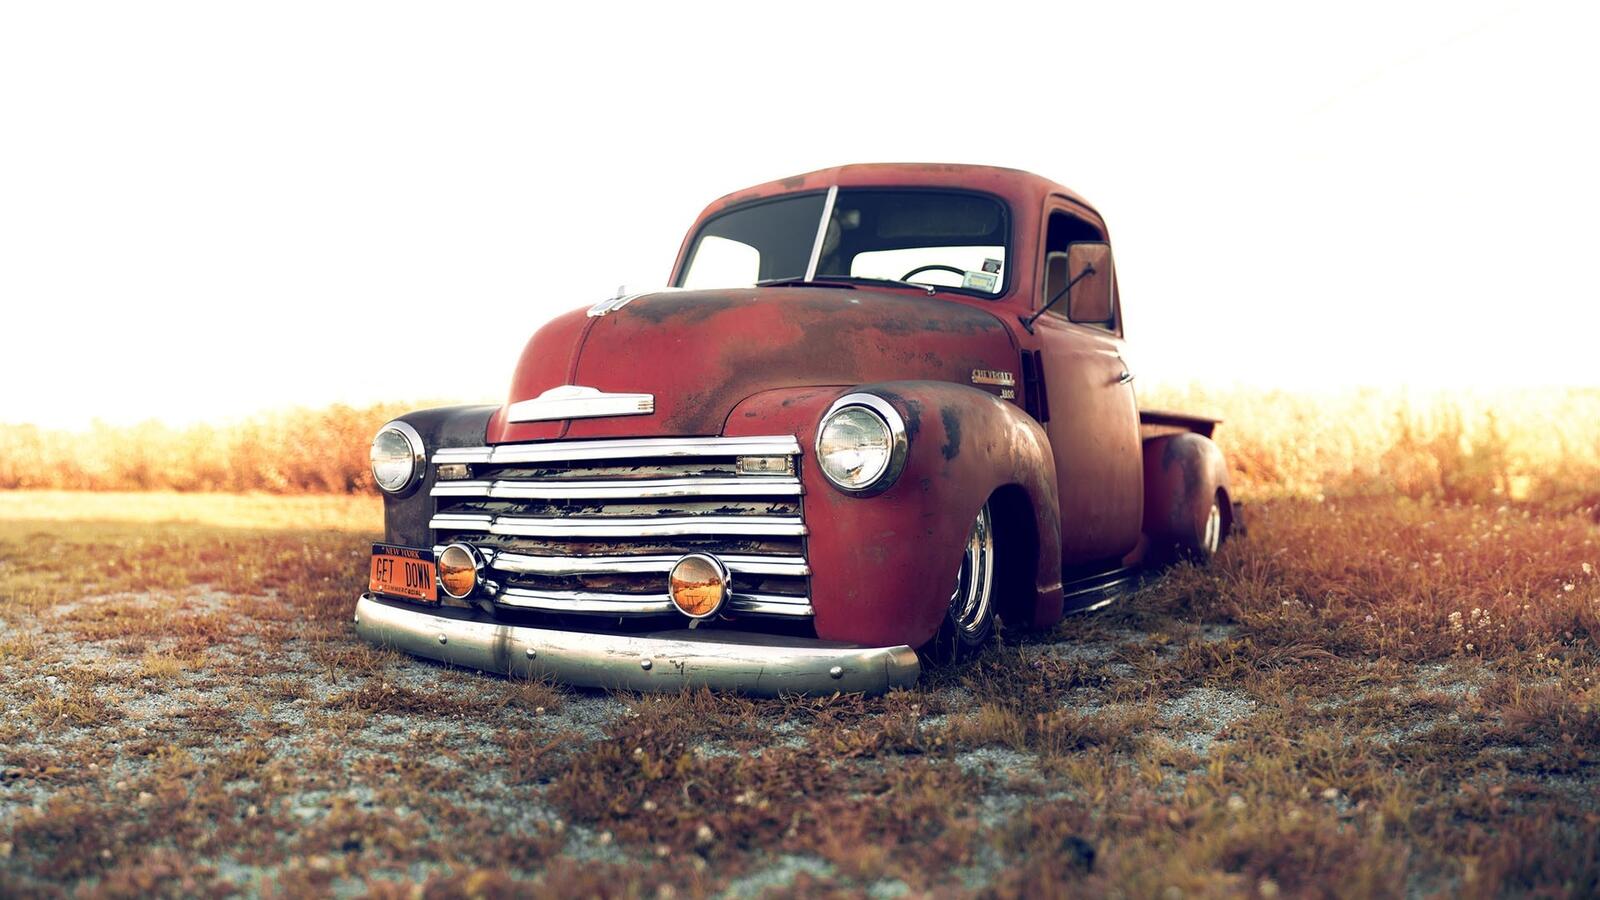 Wallpapers lowrider cars retro on the desktop